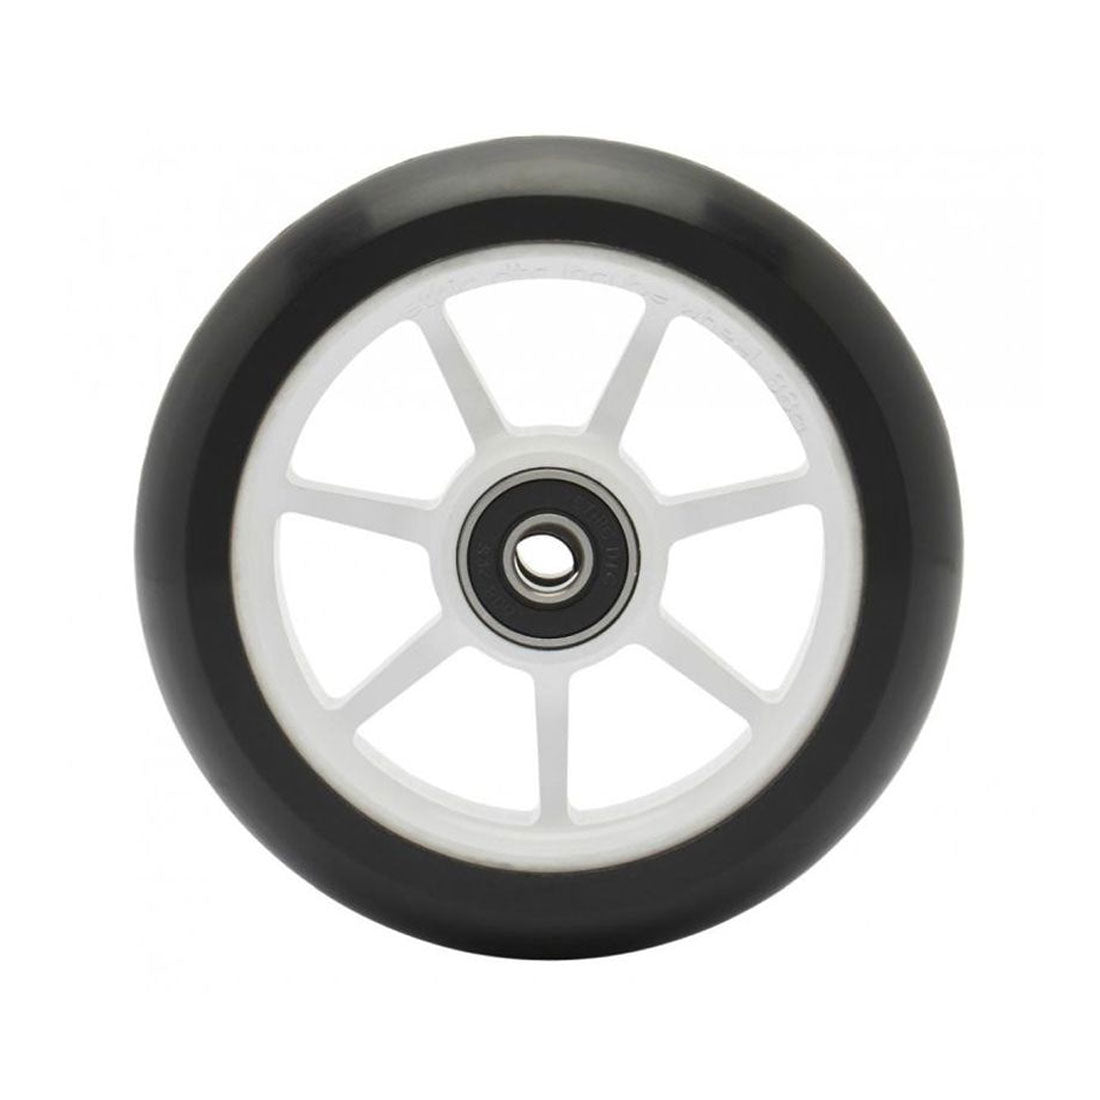 Ethic Incube 110mm Wheel - White Scooter Wheels